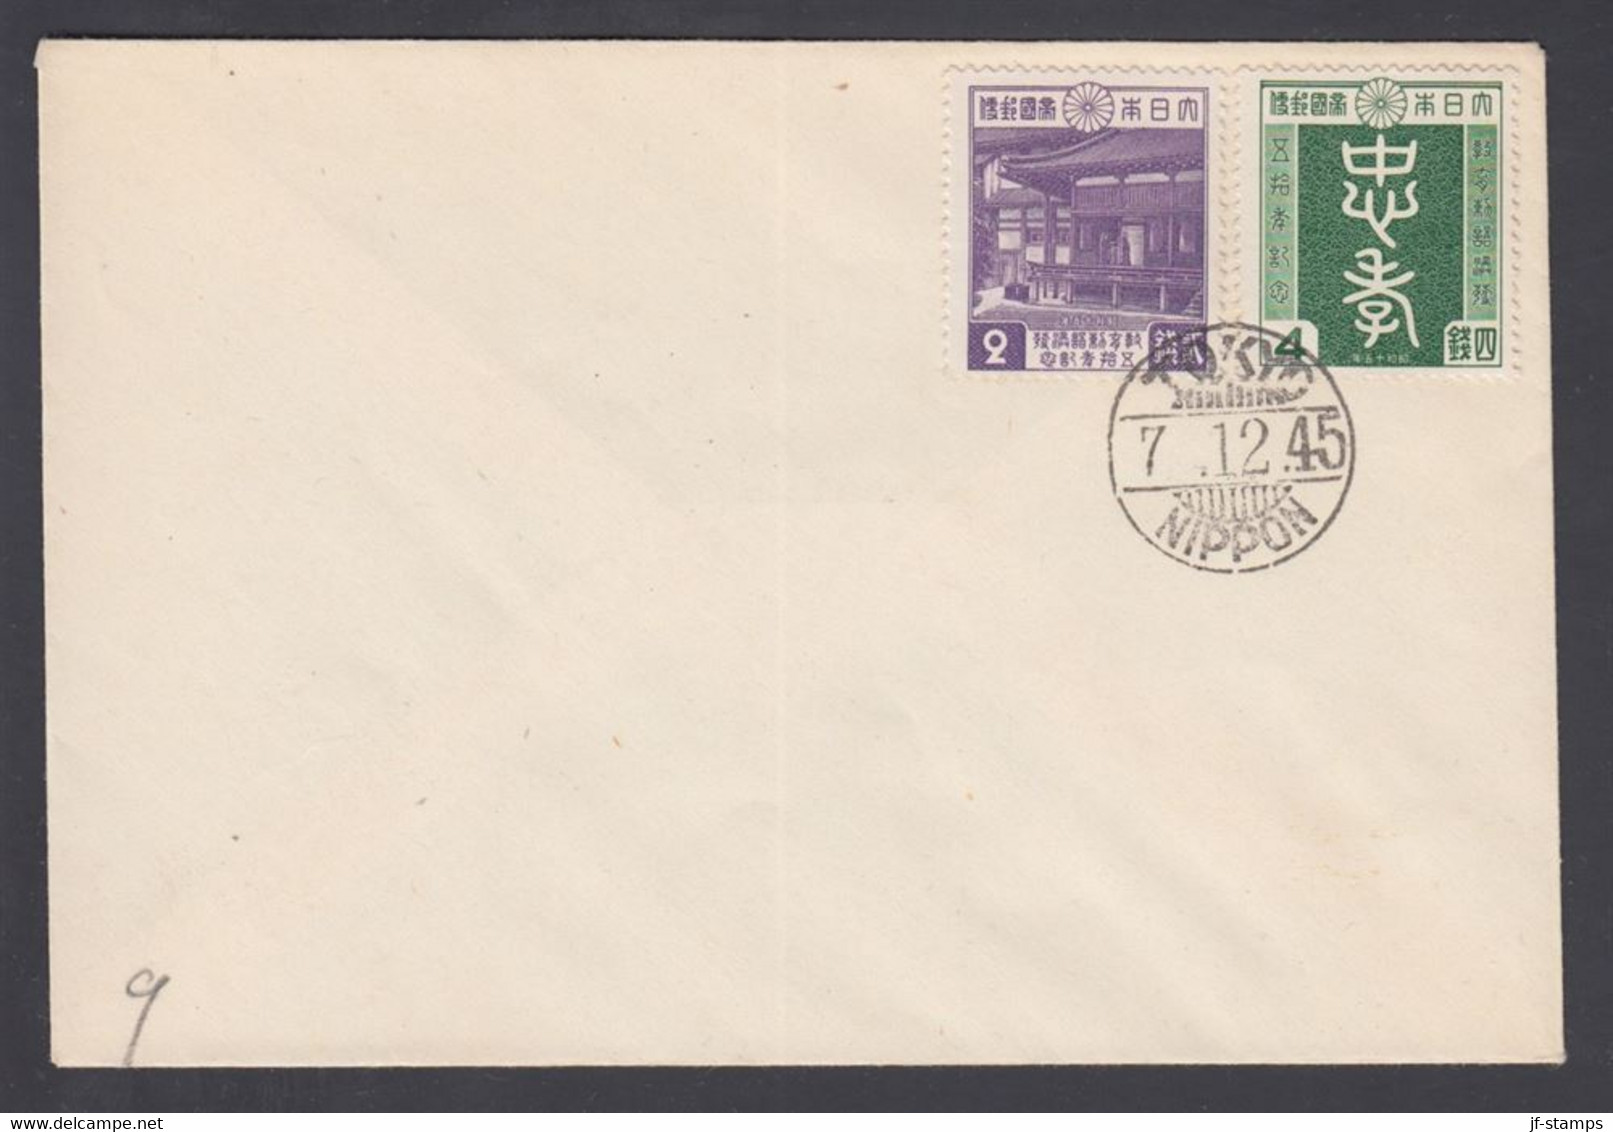 1945. JAPAN  2 + 4 S Edict Cancelled TOKIO NIPPON 7.12.45. (Michel 300-301) - JF367899 - Covers & Documents